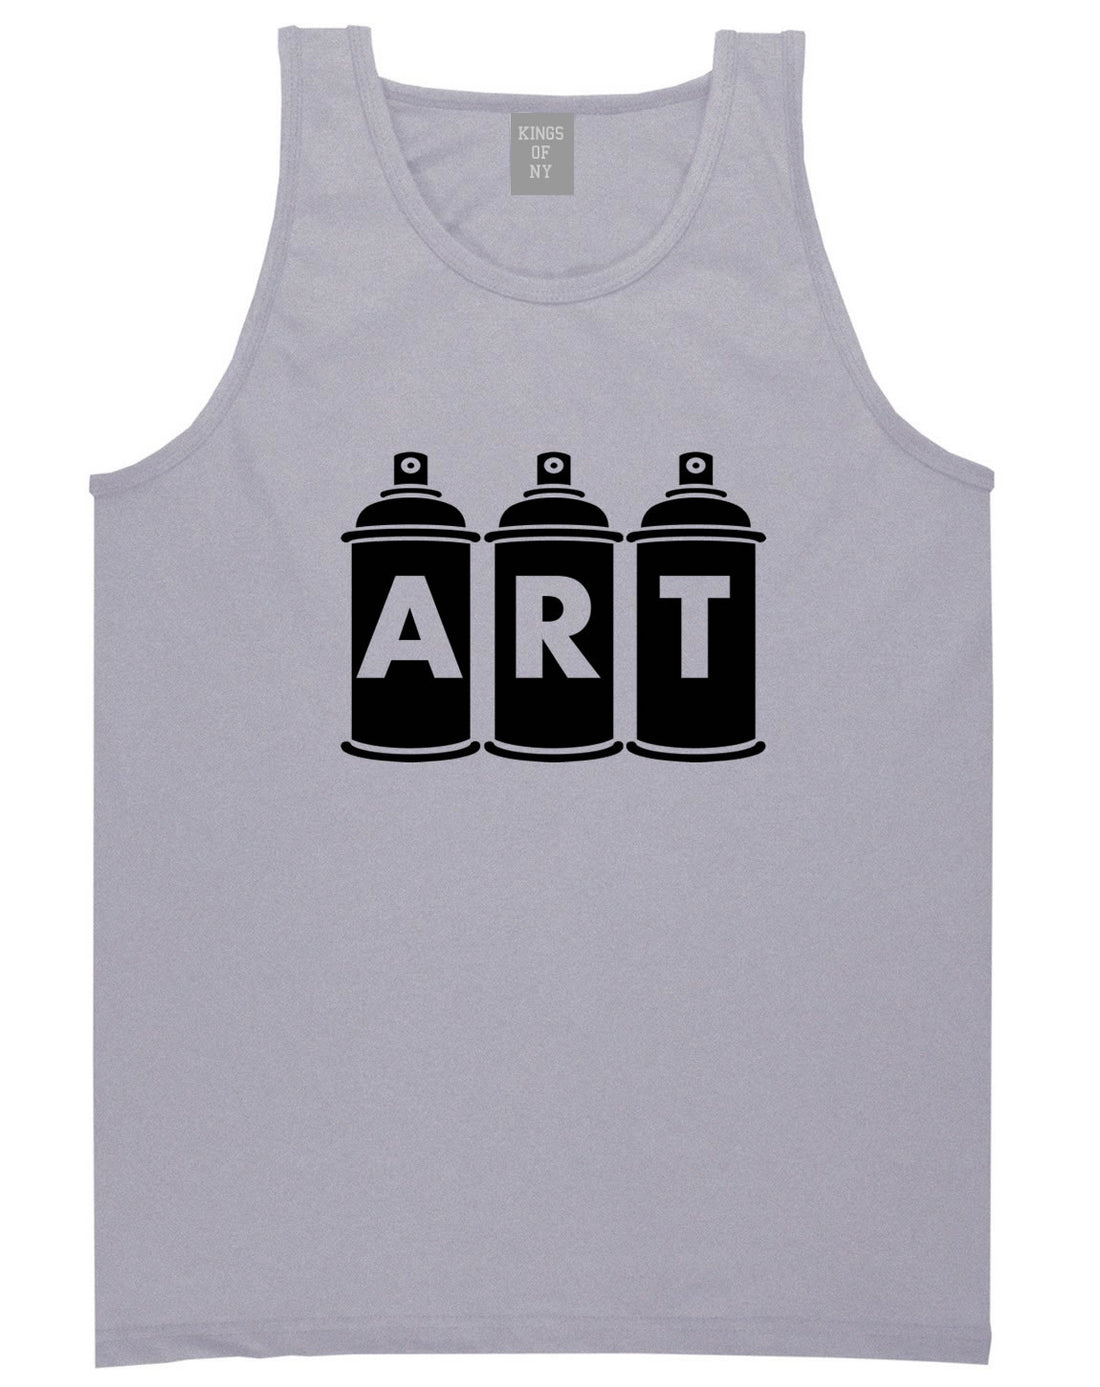 Art graf graffiti spray can paint artist Tank Top in Grey By Kings Of NY